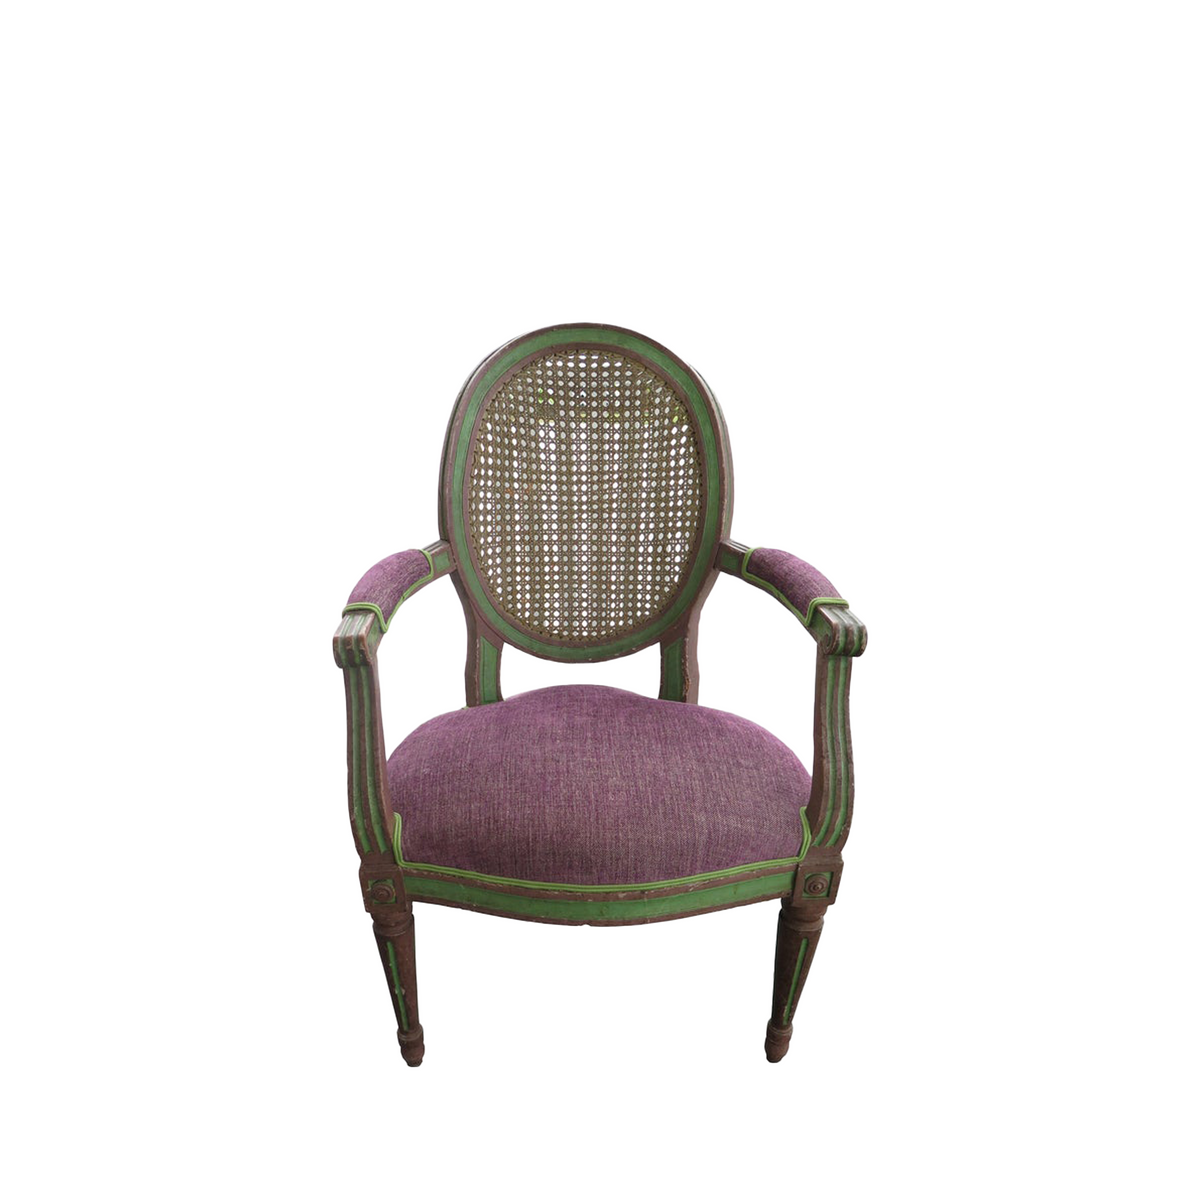 18th Century Caned Chair with Original Frame Finish